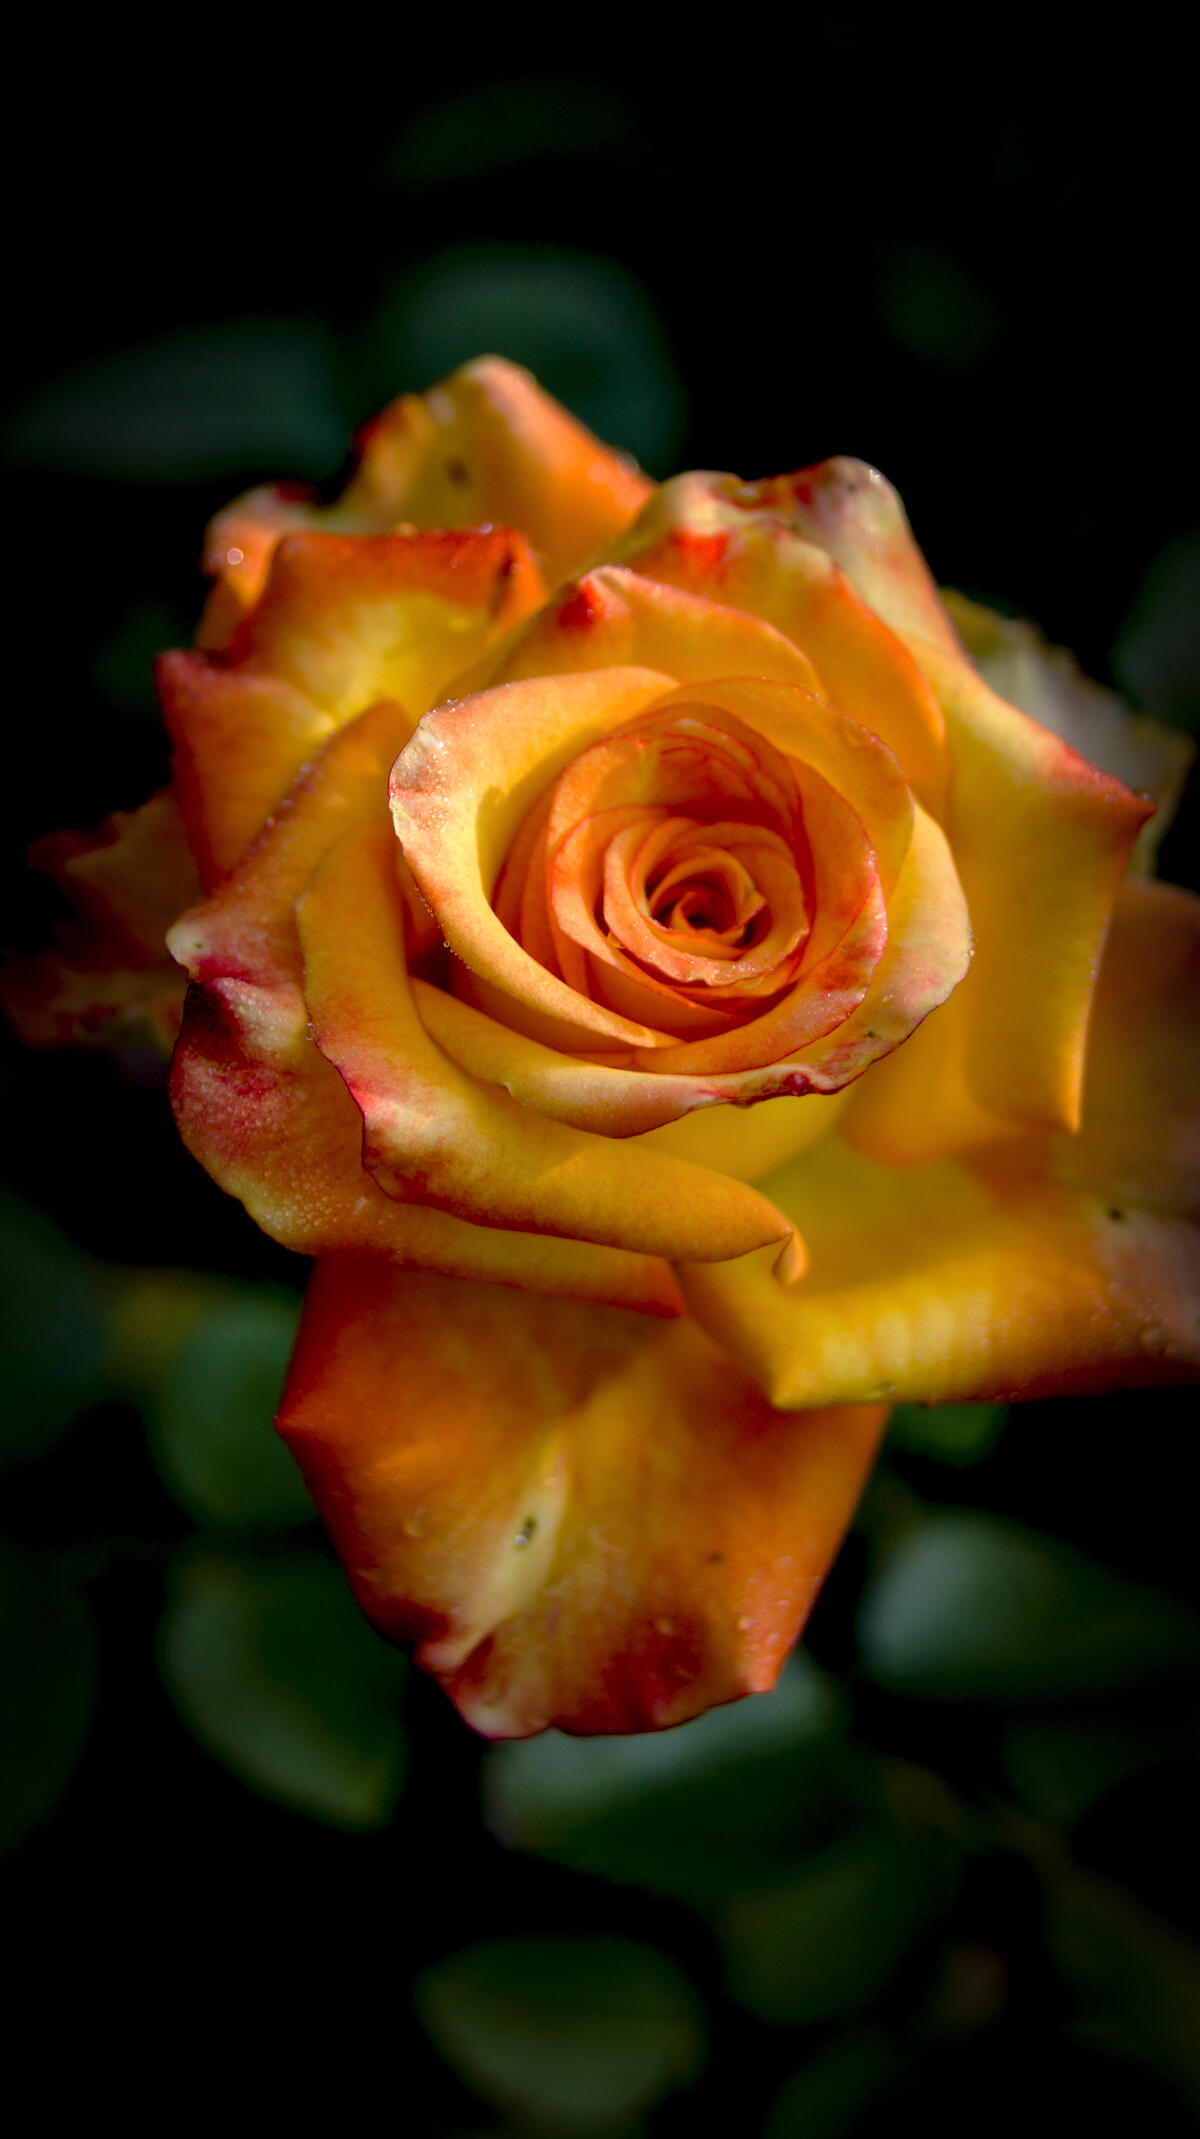 Rose.Blossoming.Yellow-orange color.